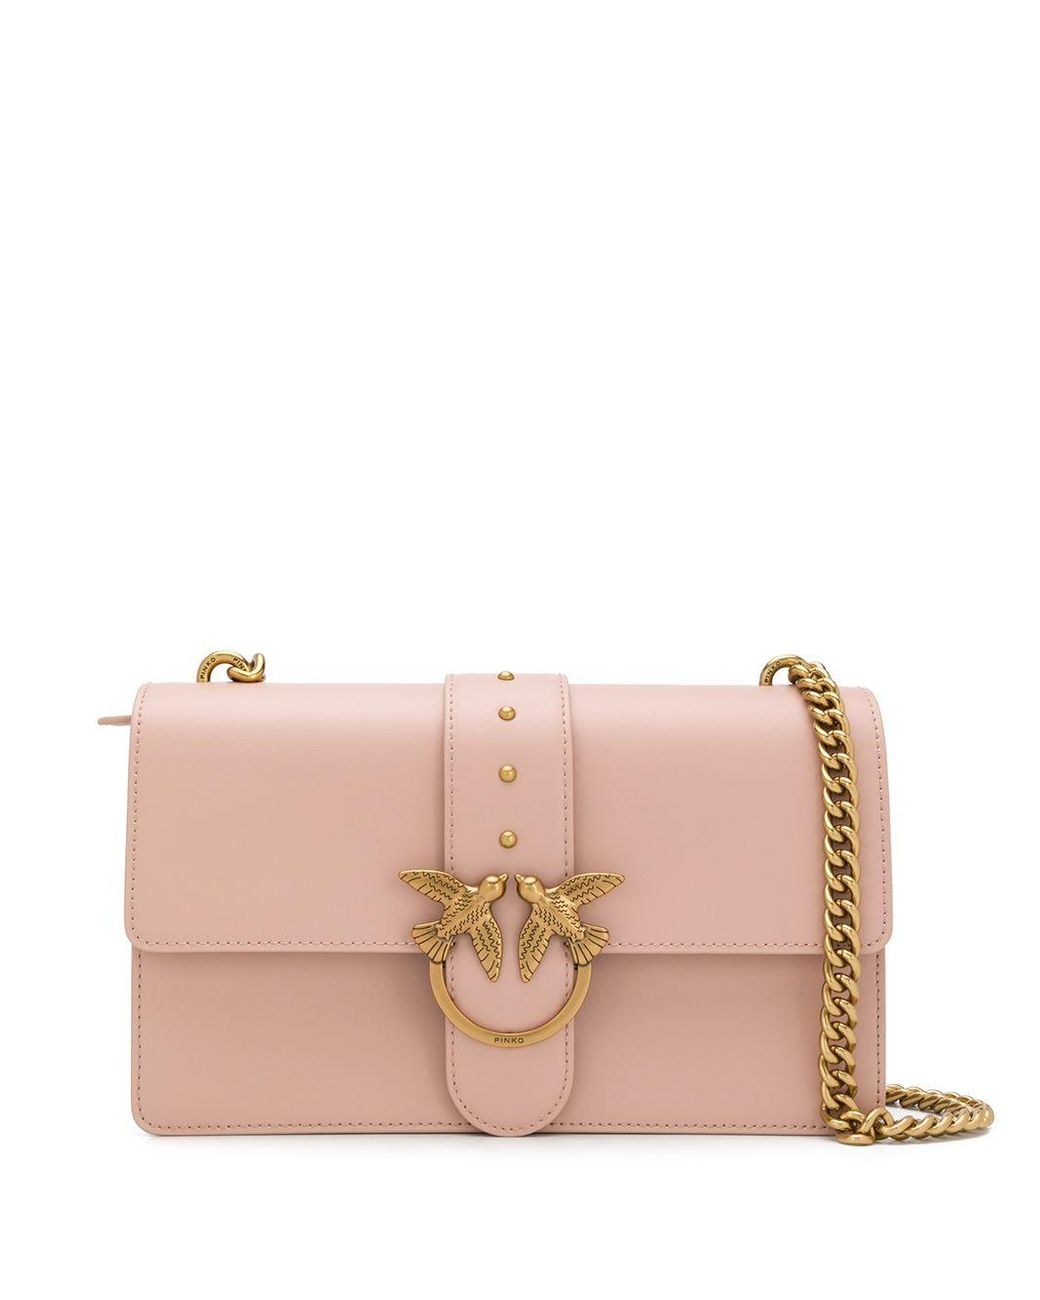 Pinko Leather Love Cross-body Bag in Pink - Lyst